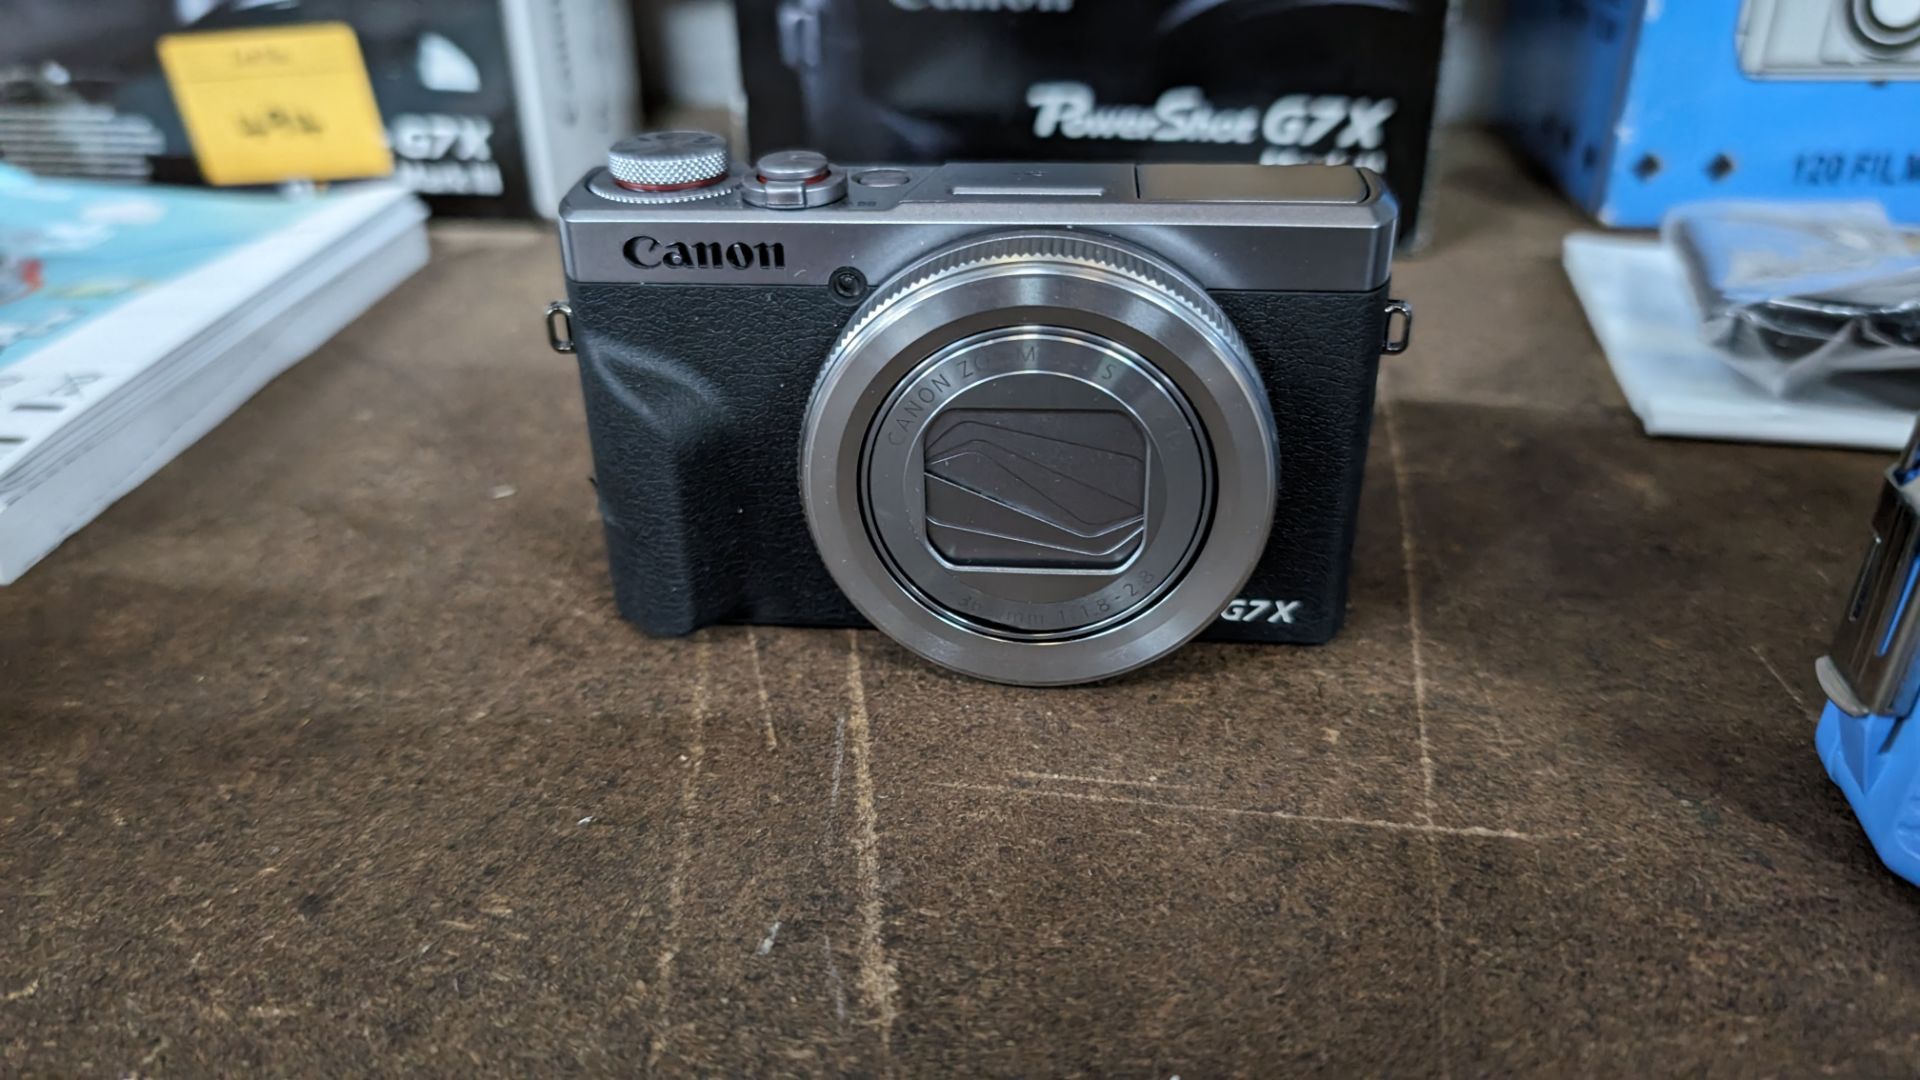 Canon PowerShot G7X Mark II camera, including battery and charger - Image 4 of 12